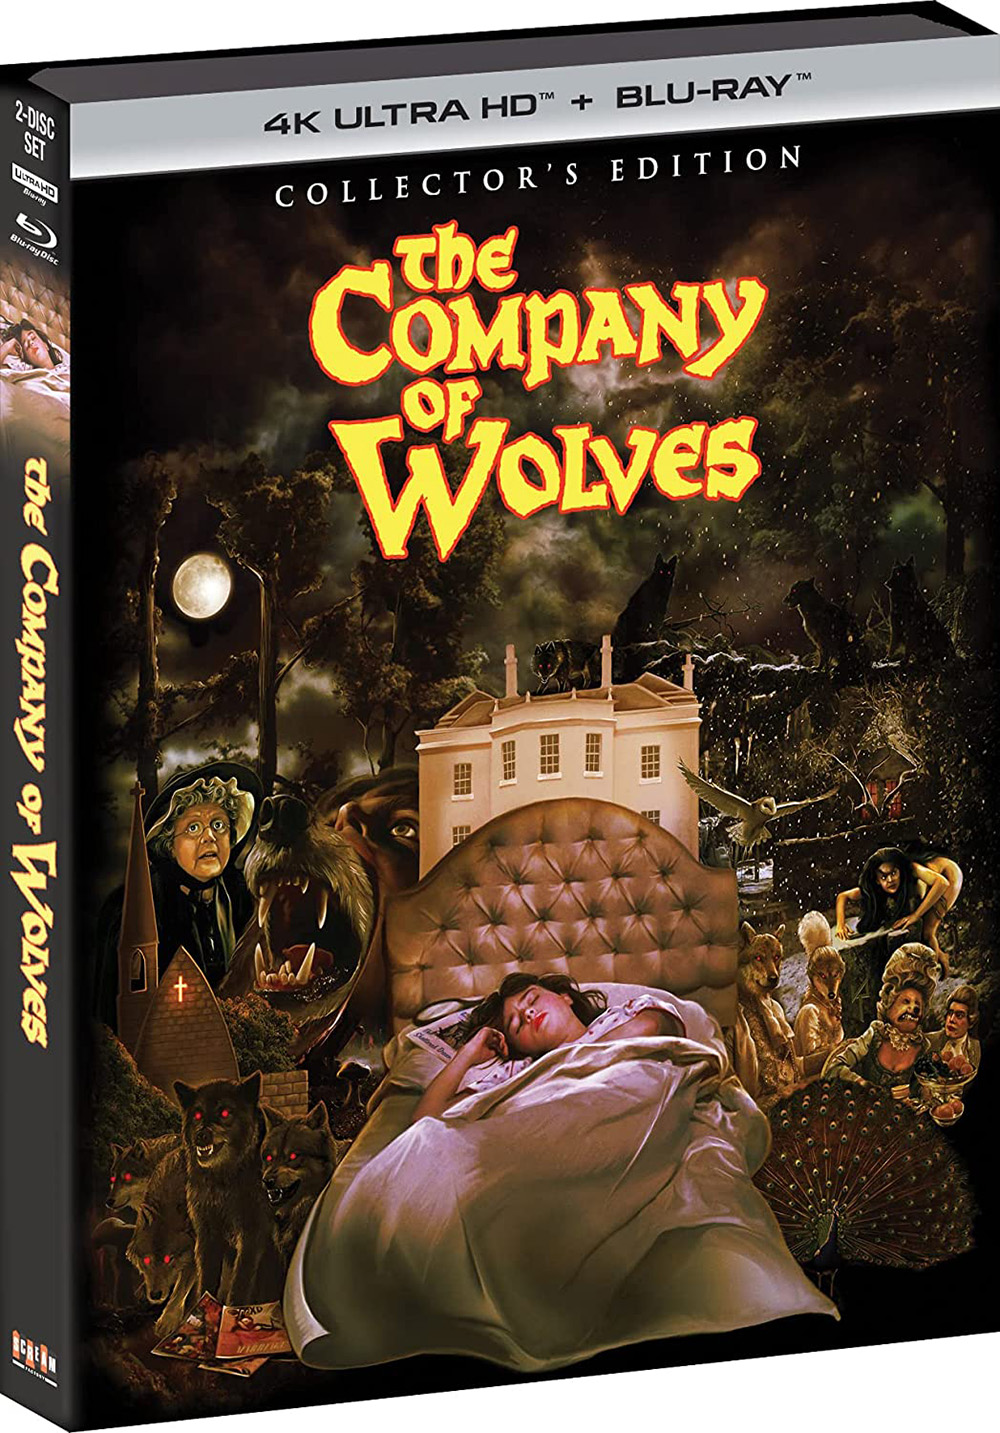 The Company of Wolves 4K UHD+ Blu-ray combo